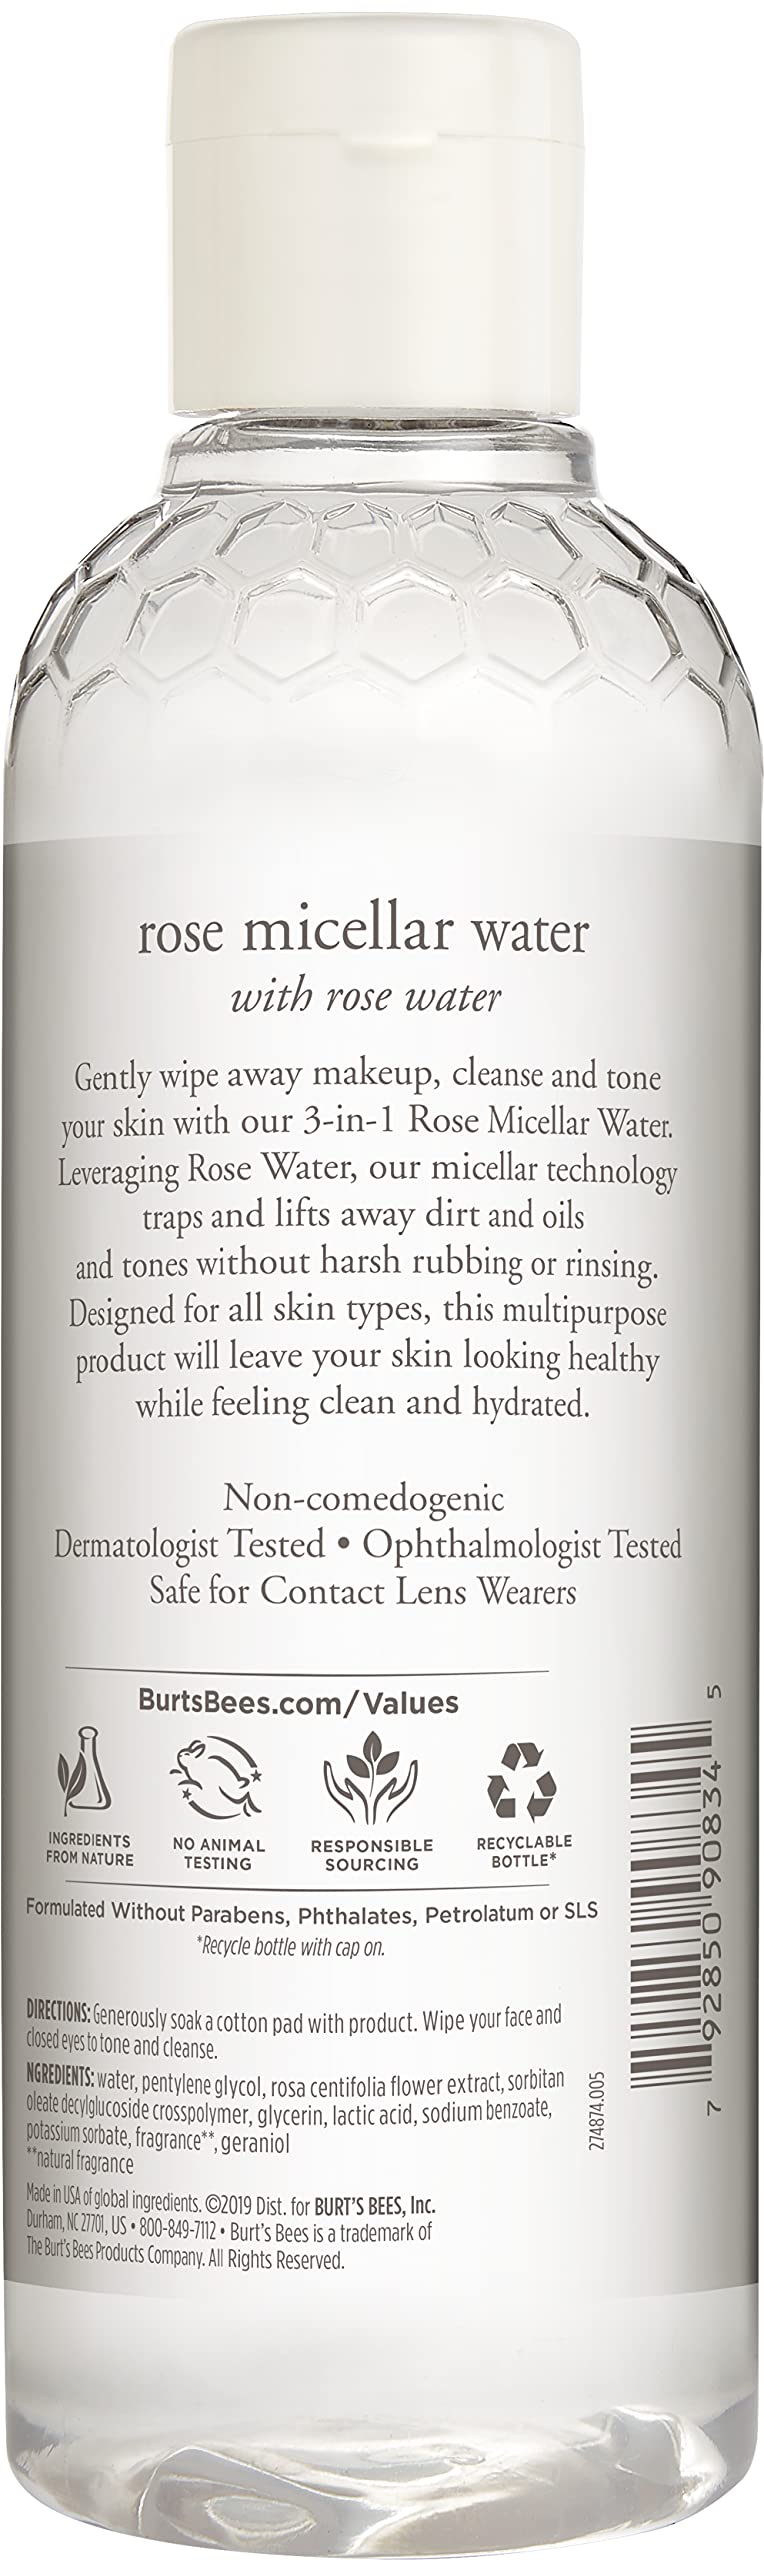 Burt's Bees Micellar Facial Cleansing Water with Rose Water, 8 Oz(Pack of 1)